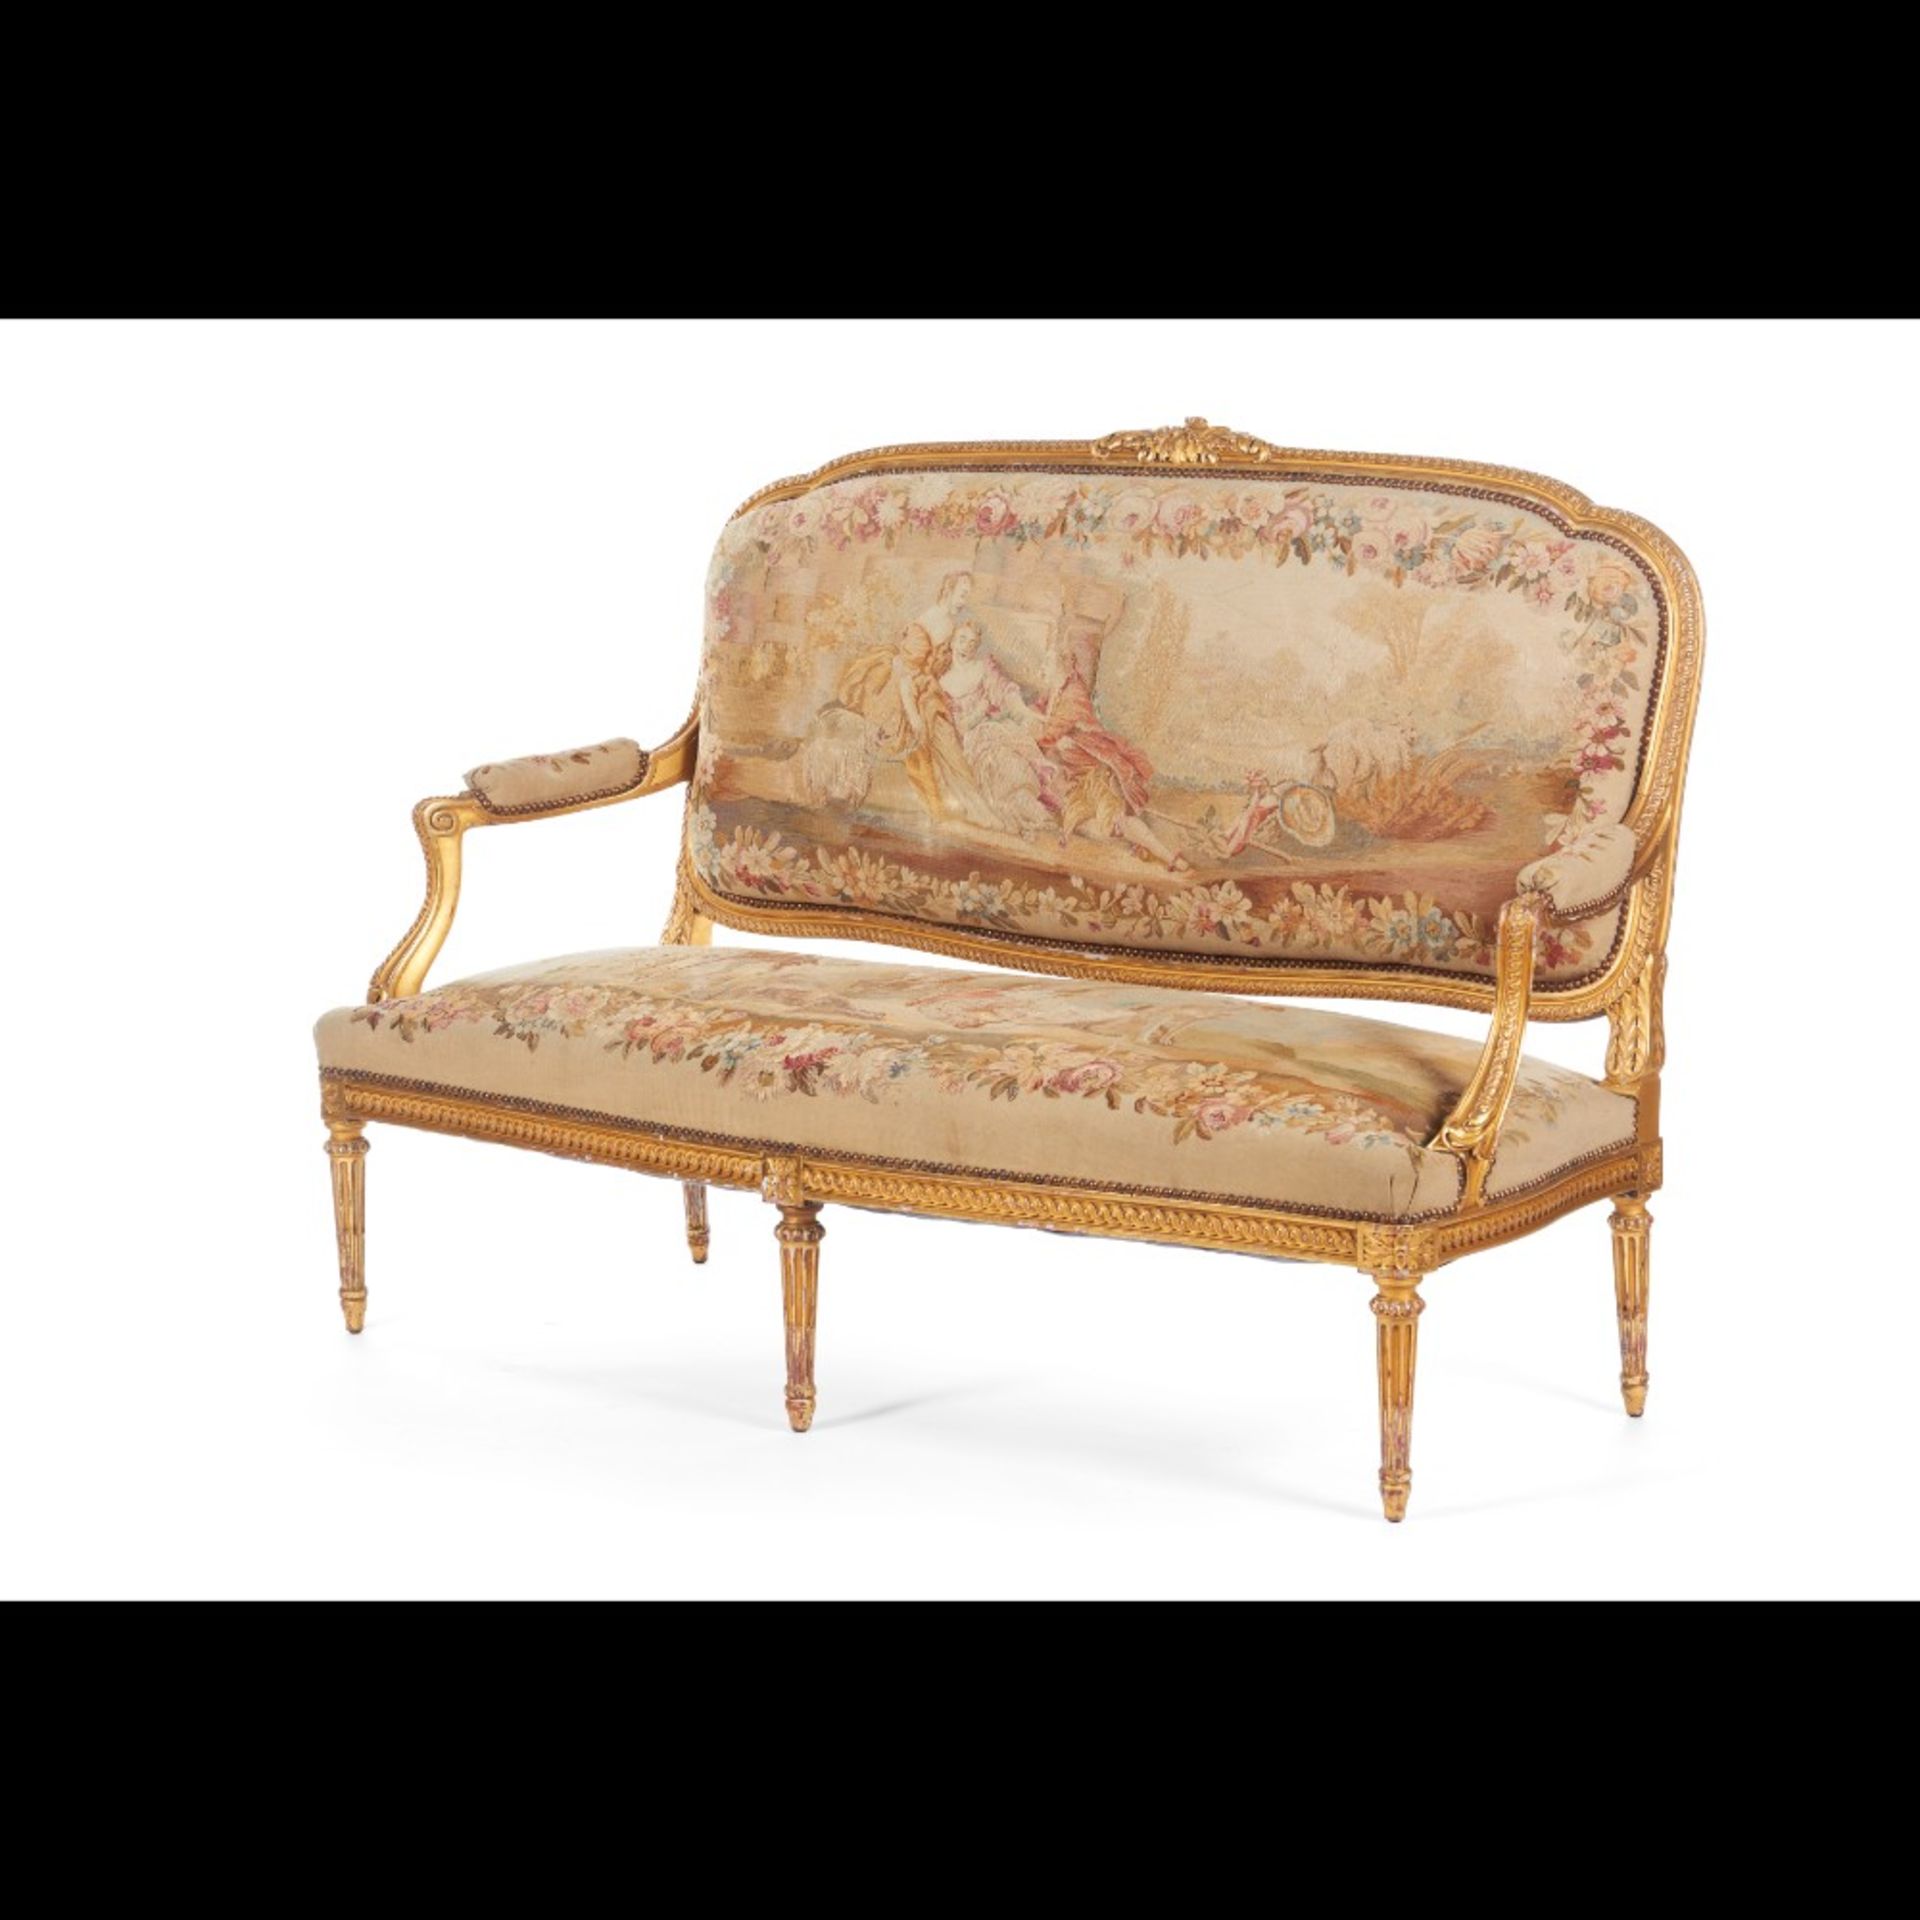  A pair of Louis XV style fauteuils and settee - Image 2 of 4